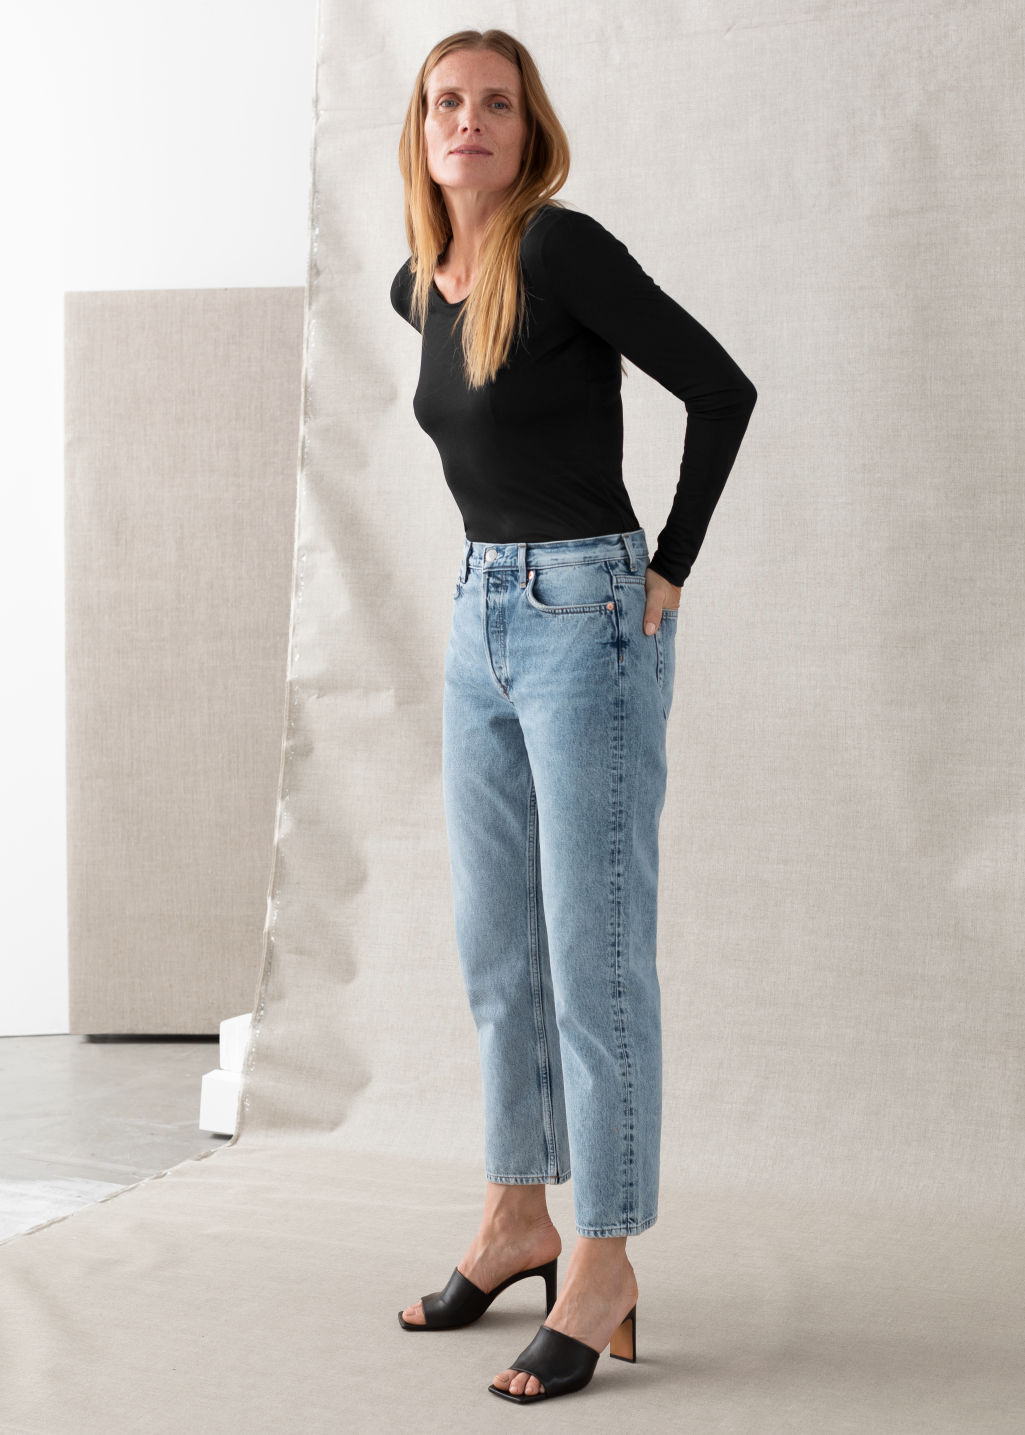 Keeper Cut Cropped Jeans - Light Blue - Jeans - & Other Stories